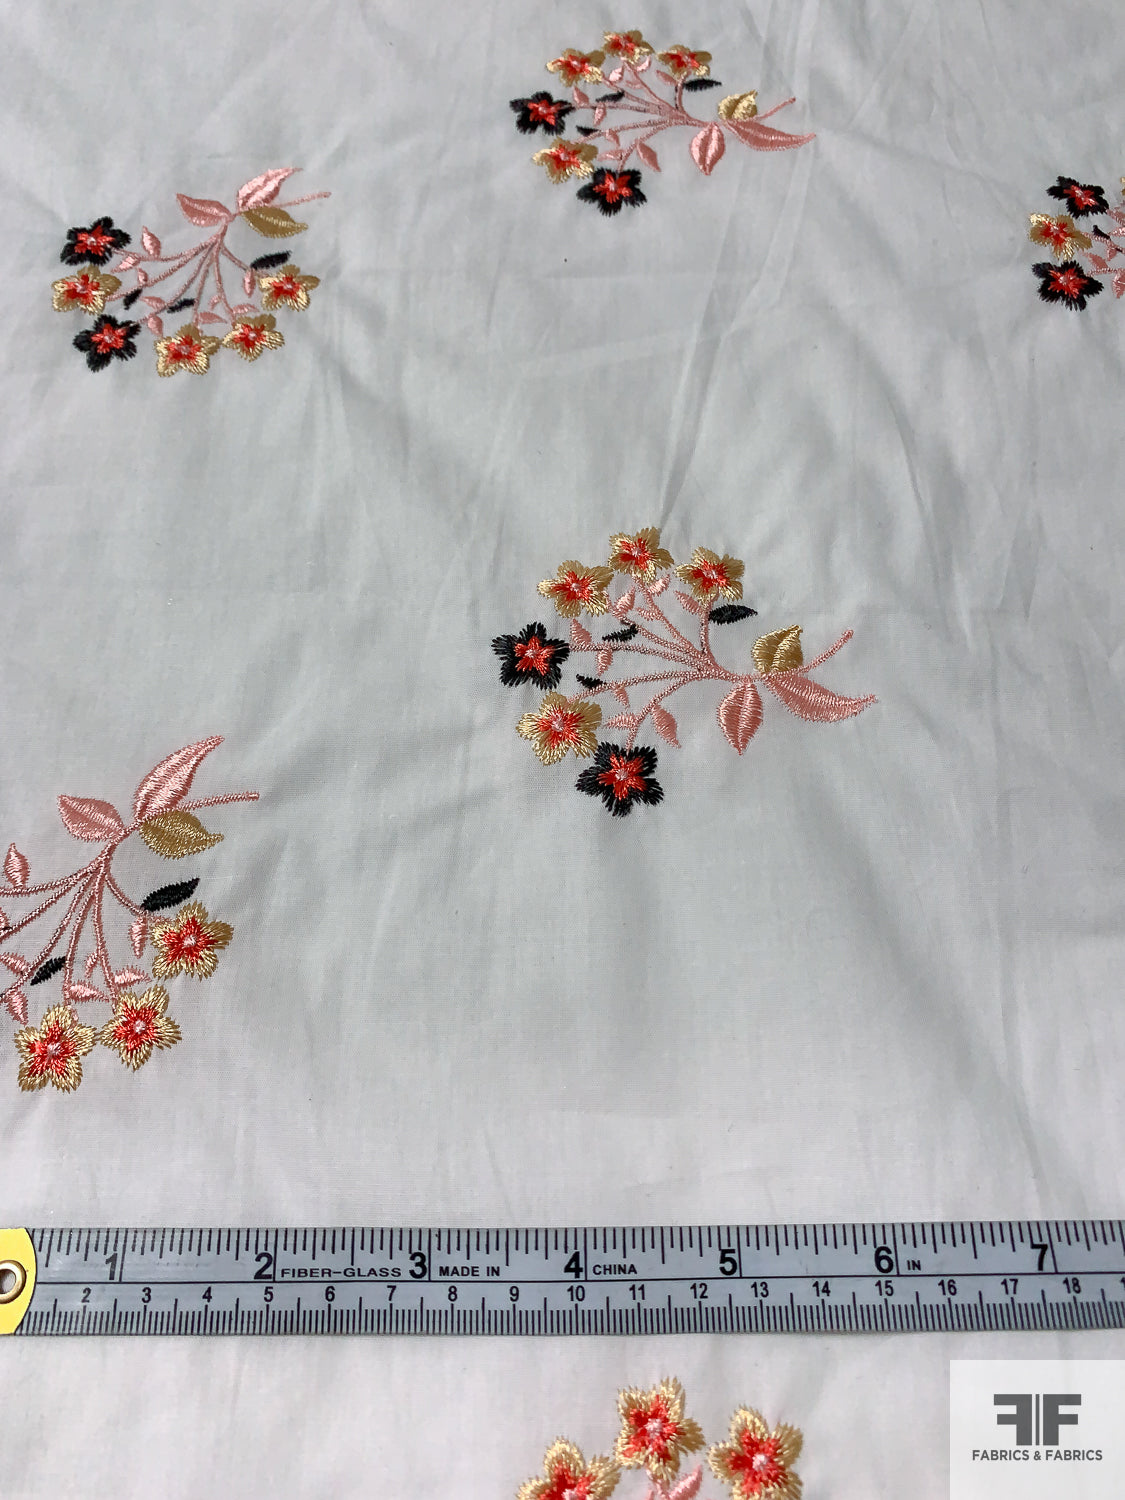 Italian Ditsy Floral Printed Cotton Lawn - Yellow / Pink / Coral / Black /  White - Fabric by the Yard